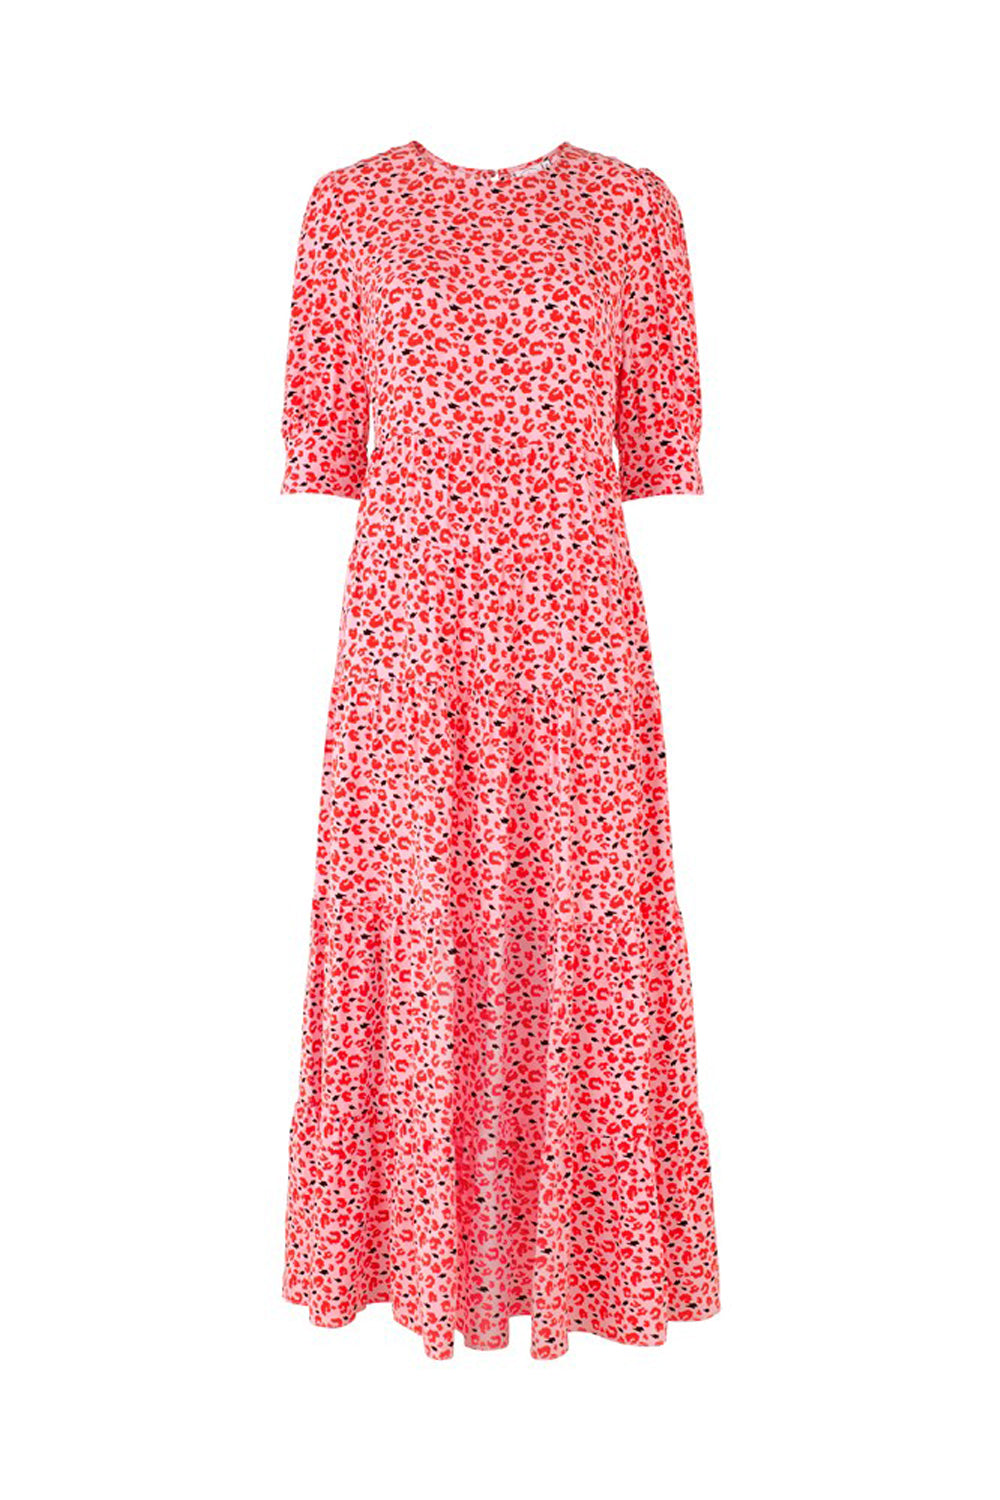 Adult Tiered Maxi Dress Pink with Red Leopard Print and Lightning Bolt ...